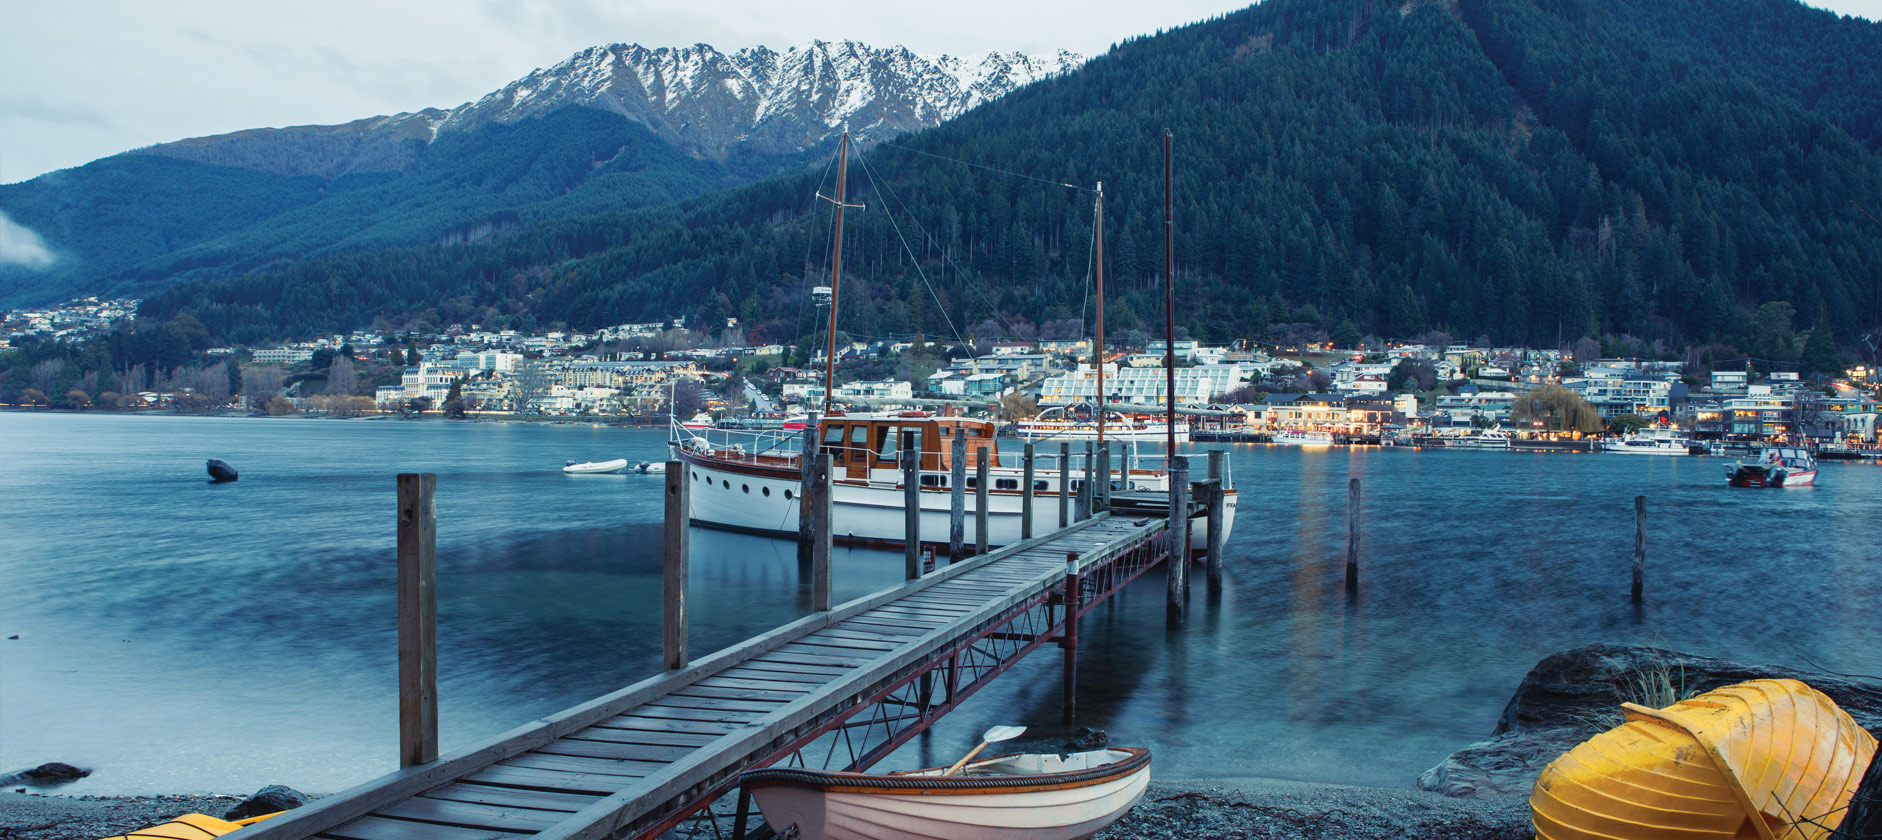 The New Fandangled Diet Scheme and Why You Should Visit Queenstown